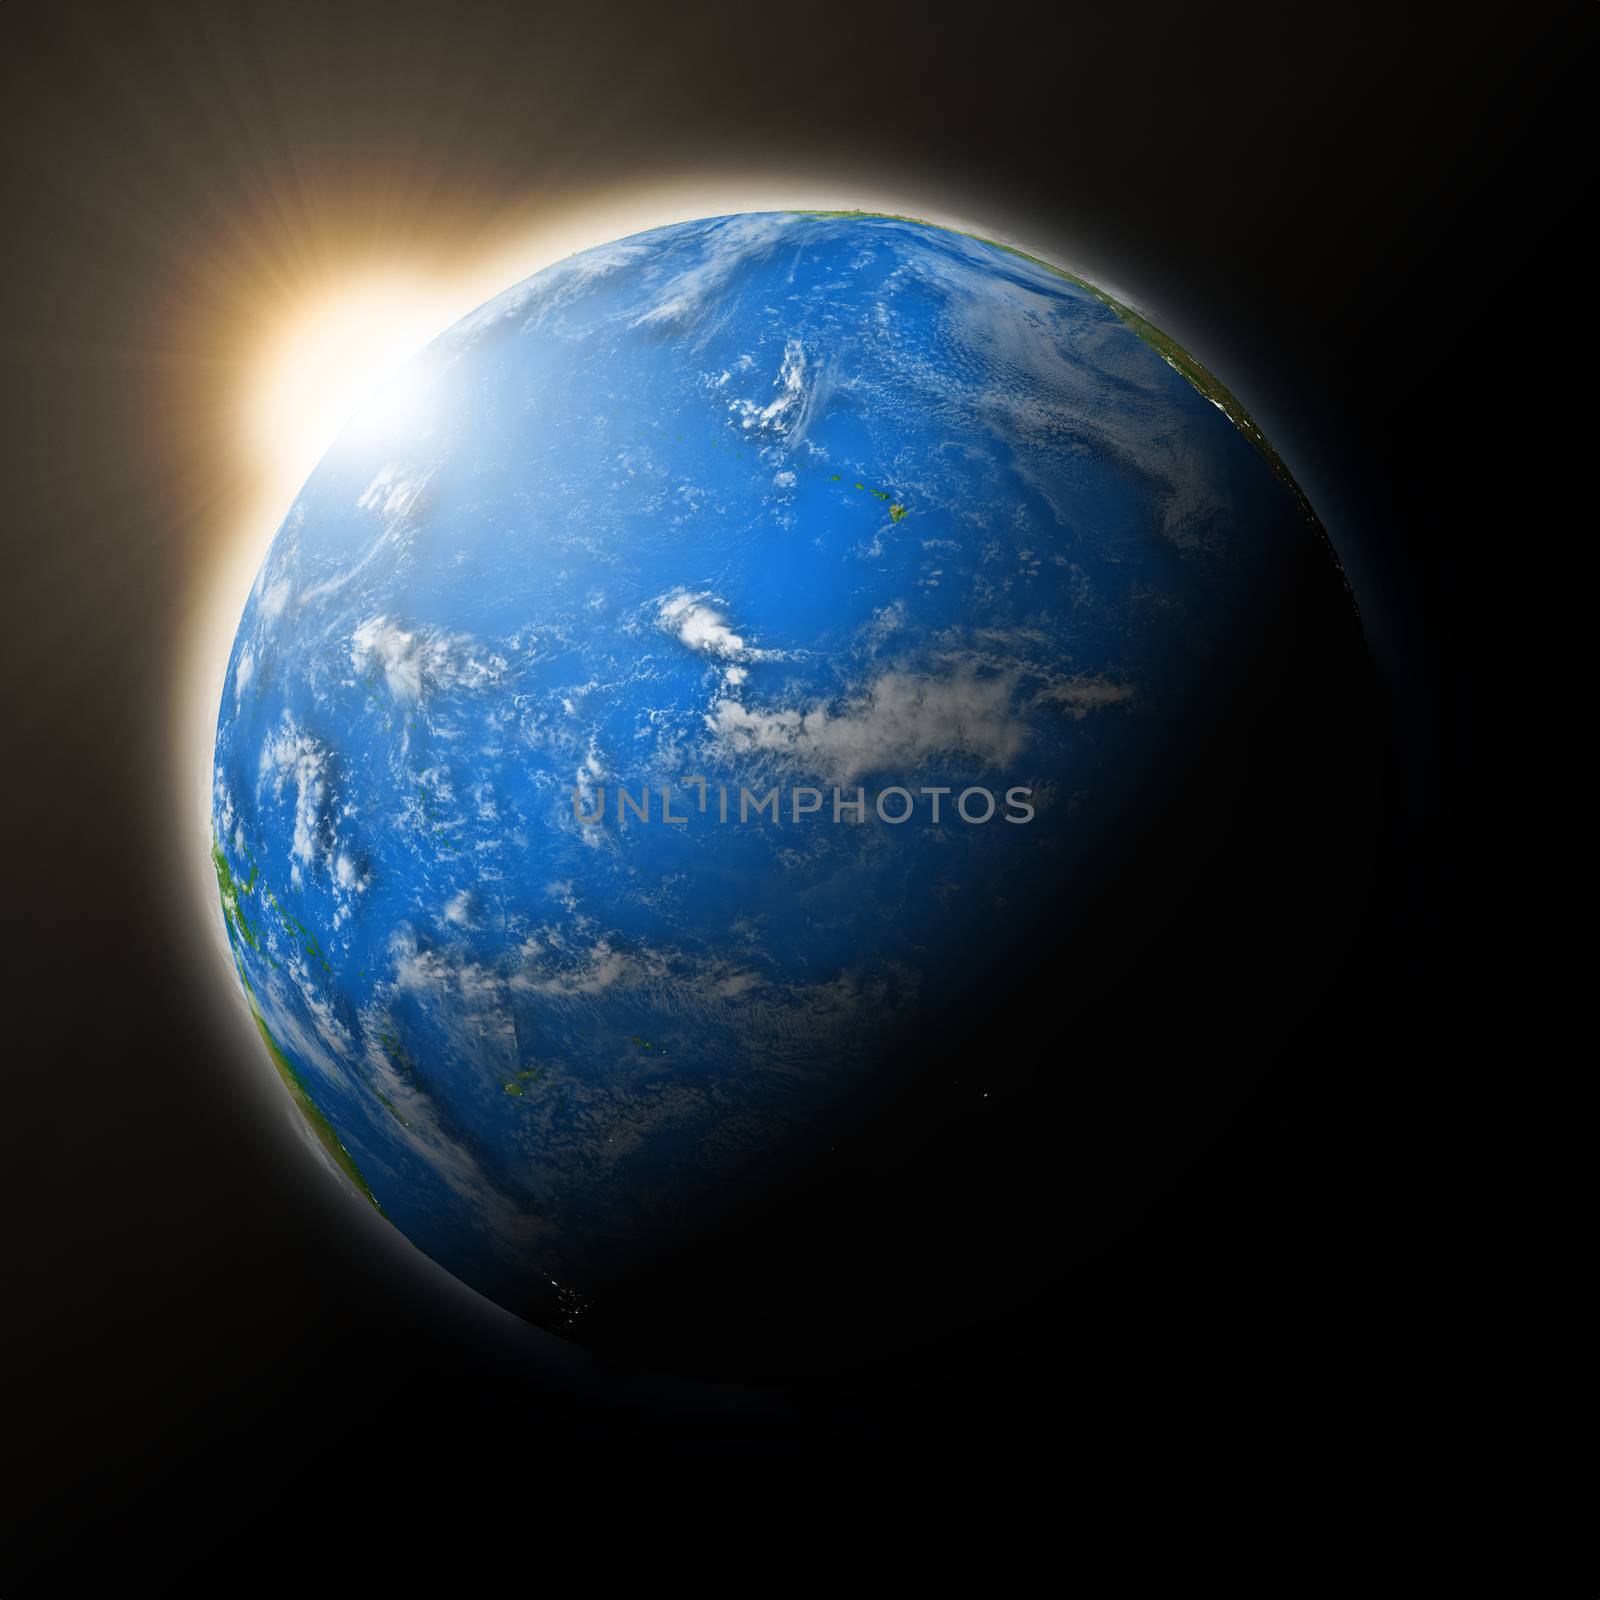 Sun over Pacific Ocean on blue planet Earth isolated on black background. Highly detailed planet surface. Elements of this image furnished by NASA.